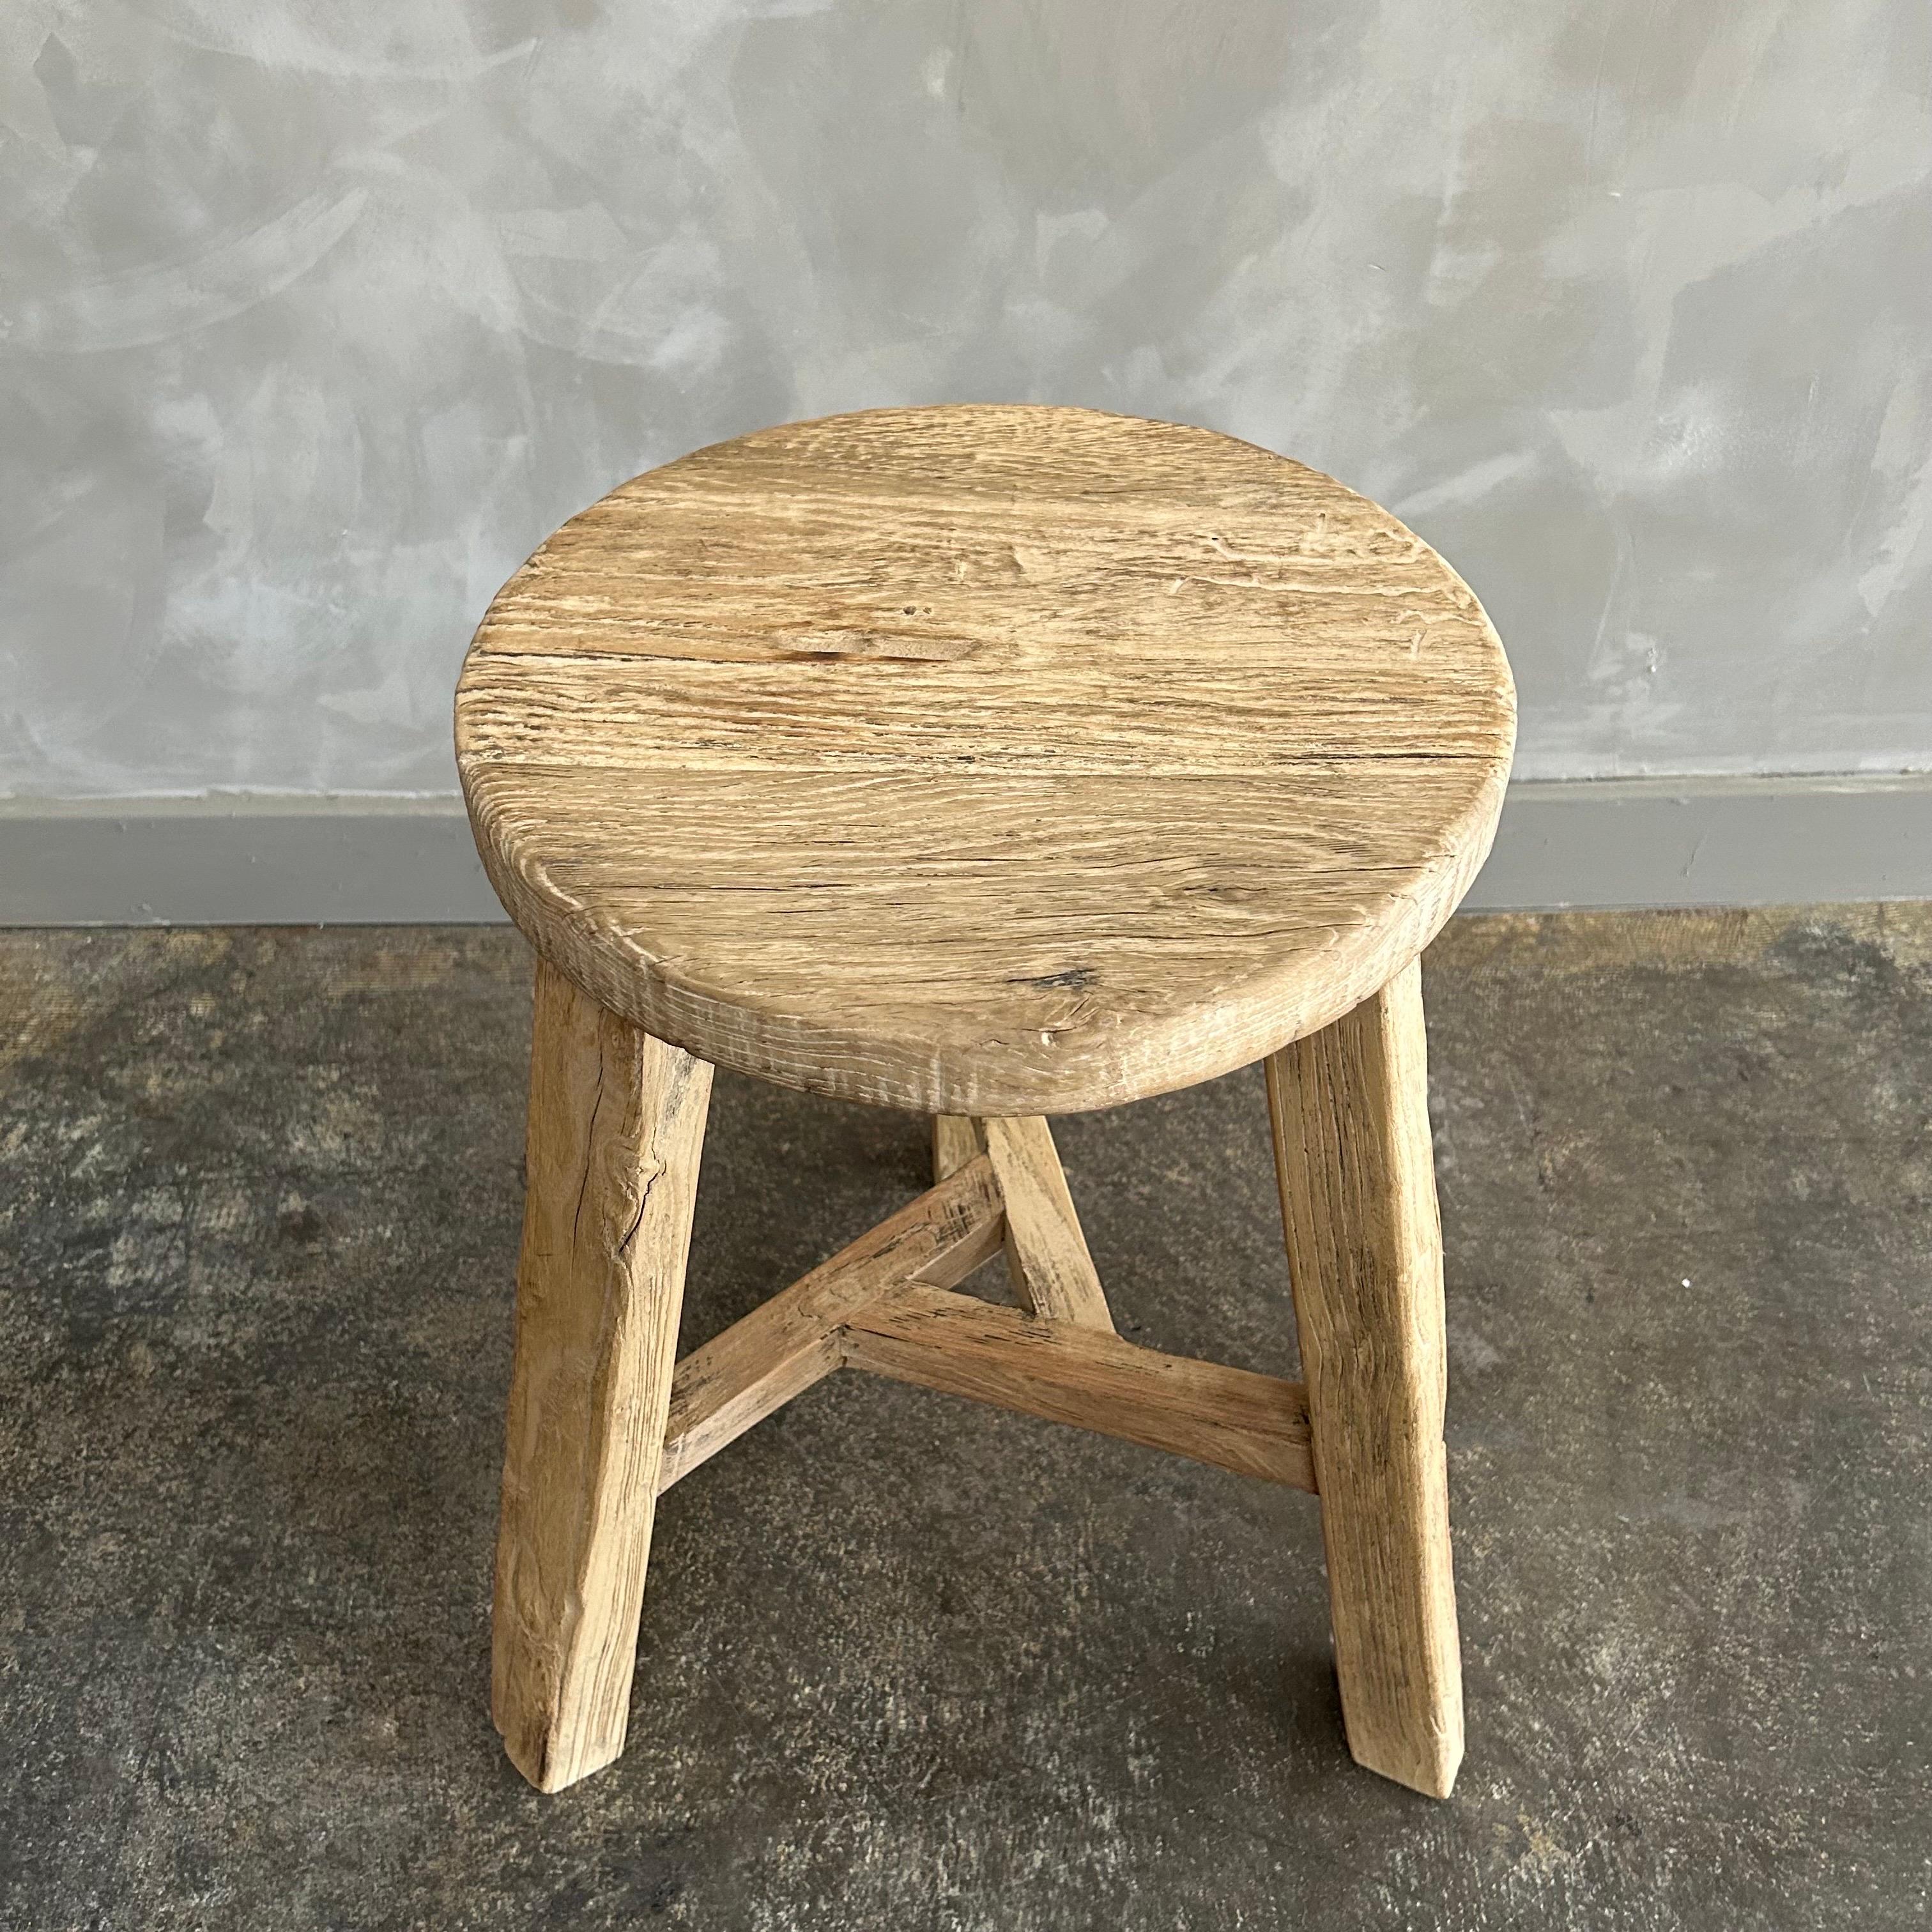 Bloom Home inc has over 2000 items in stock ready for immediate shipping, scroll down to view all of our items!

Elm rd. Stool 16”w x 16”d x 19.5”h
Seat: 12.5”rd.
Vintage Reclaimed Elm Wood Round Stools
Beautiful antique patina, with weathering